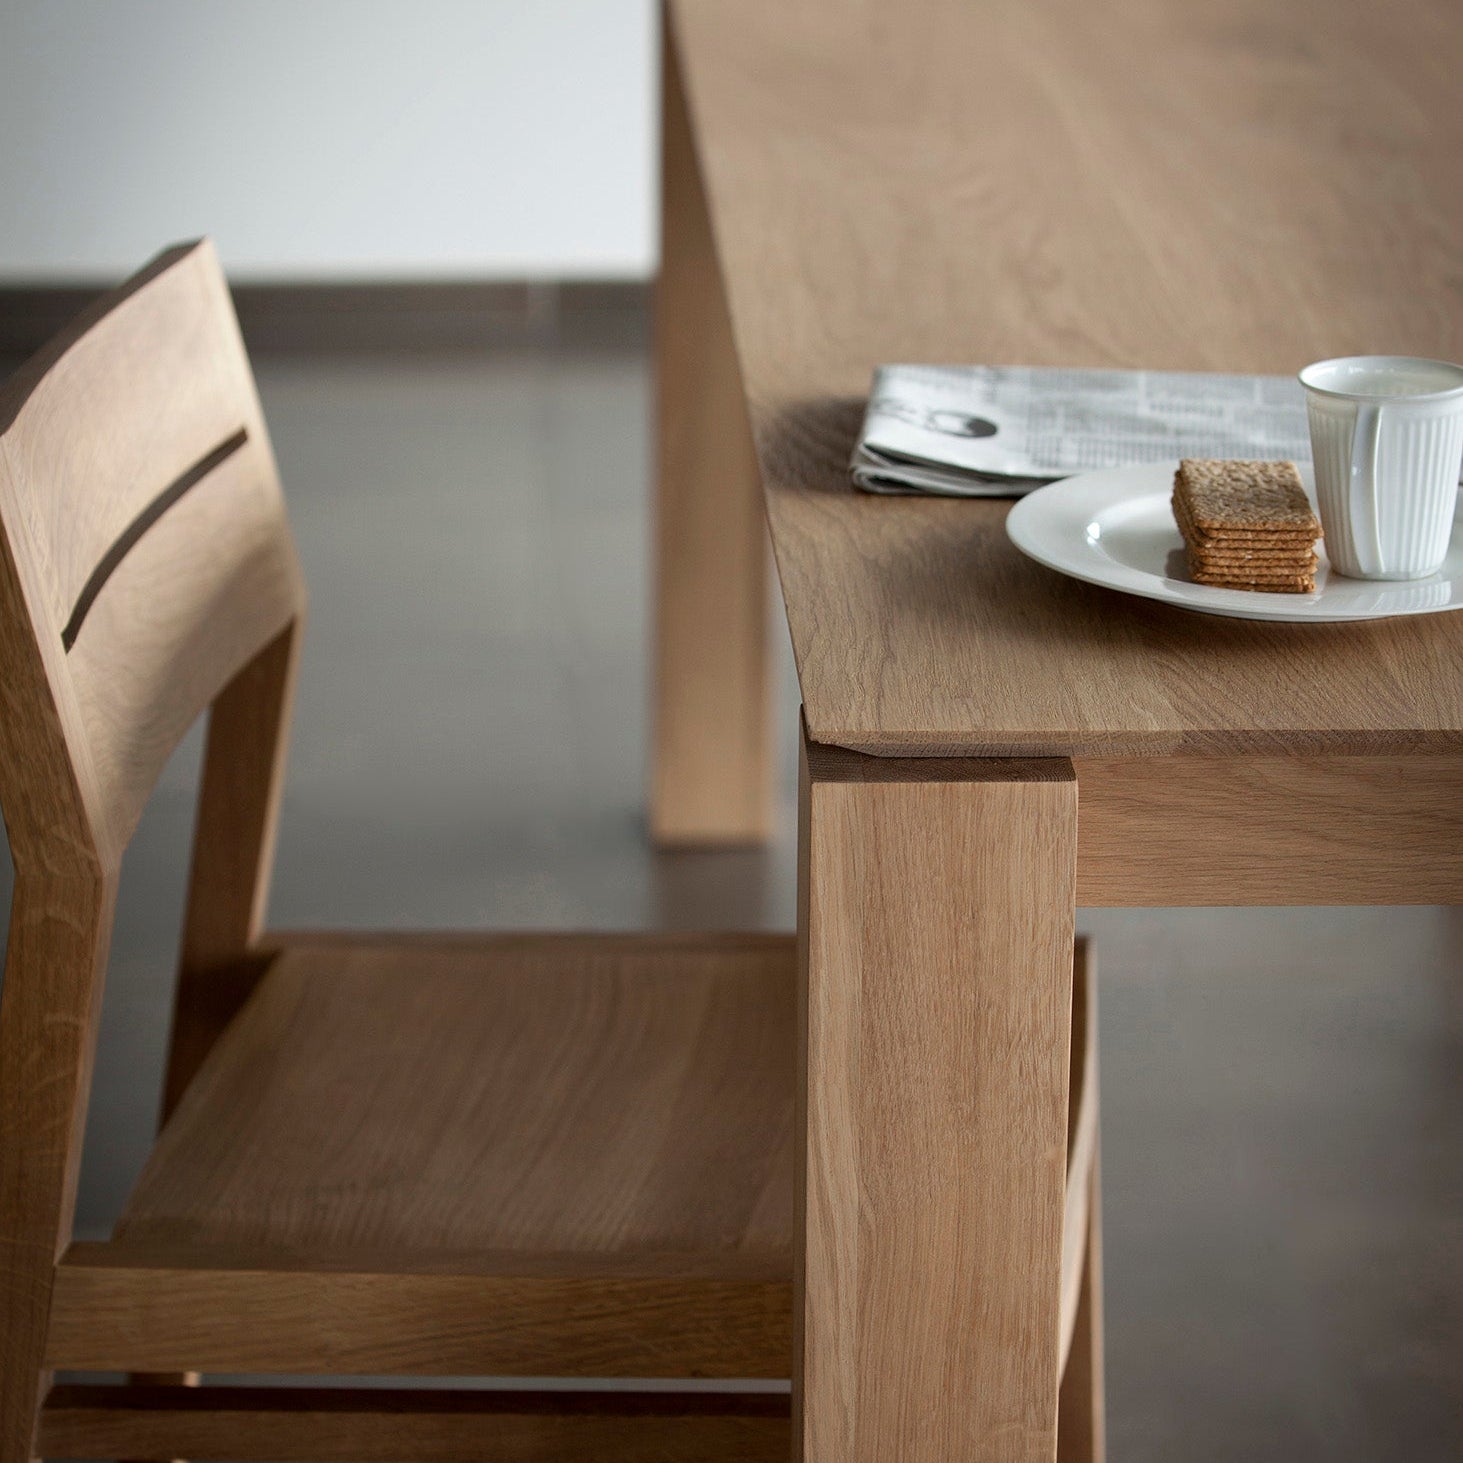 slice dining table by ethnicraft at adorn.house